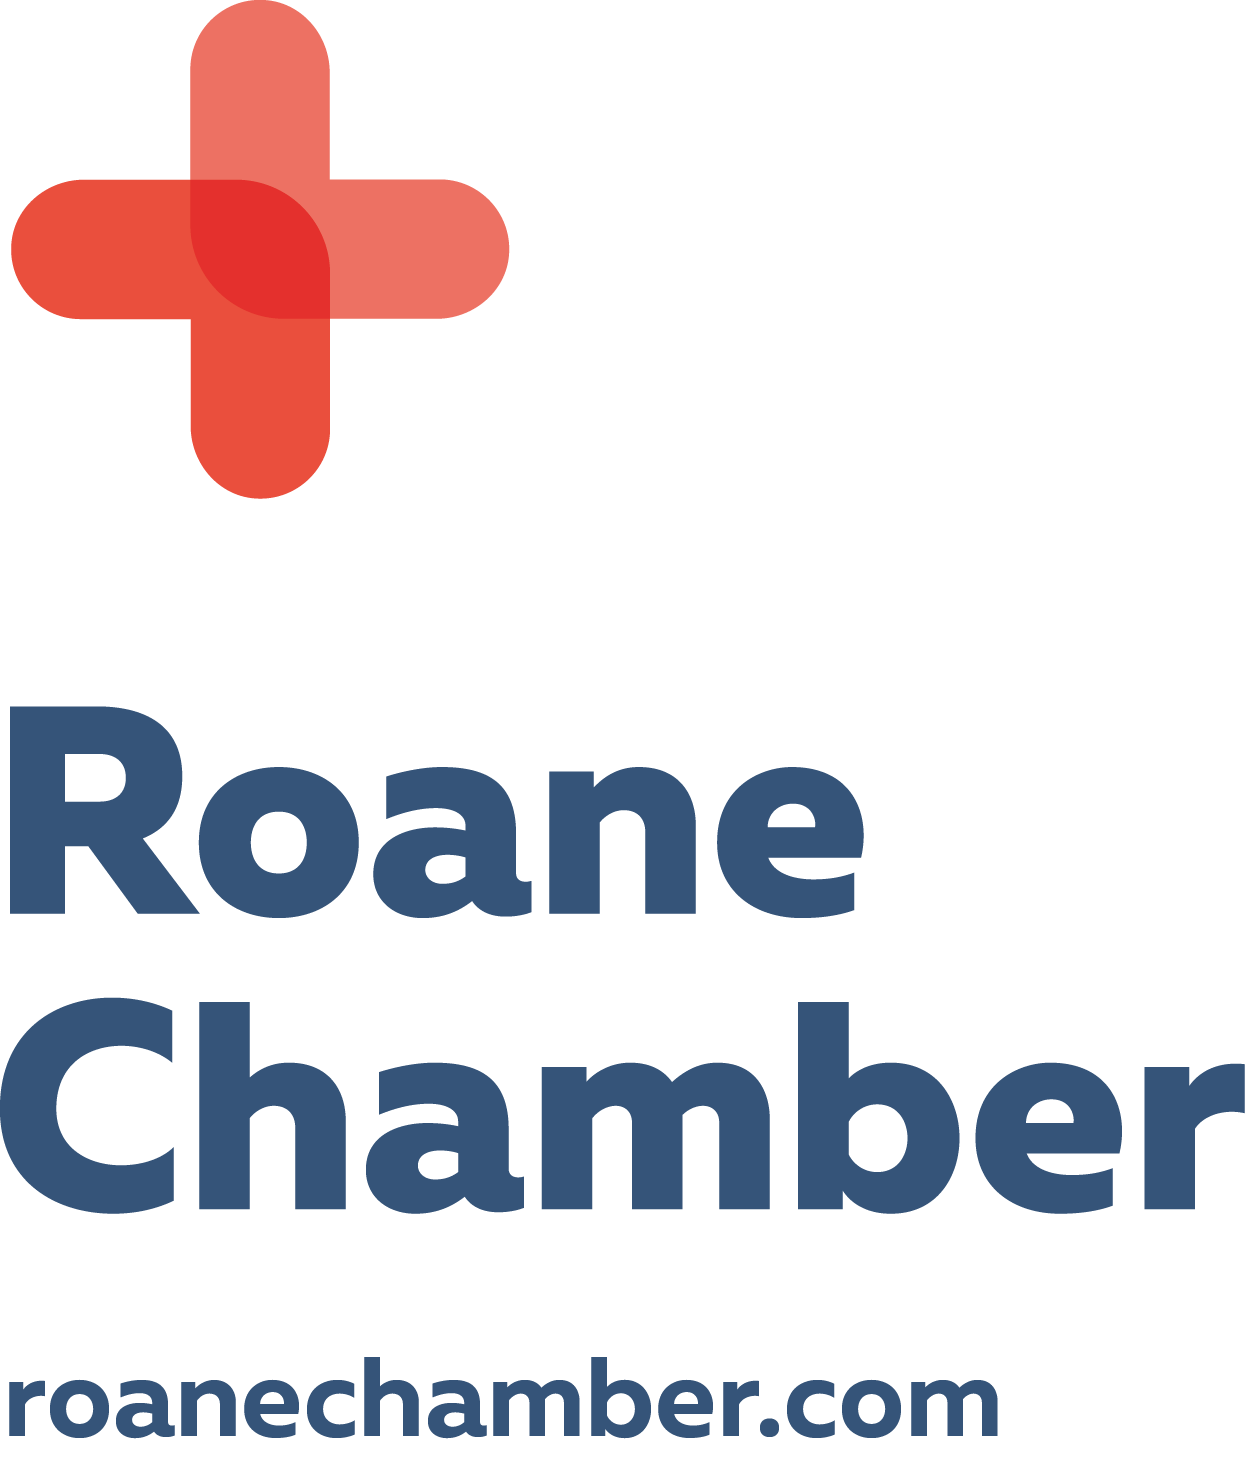 Learn more about the Roane Chamber